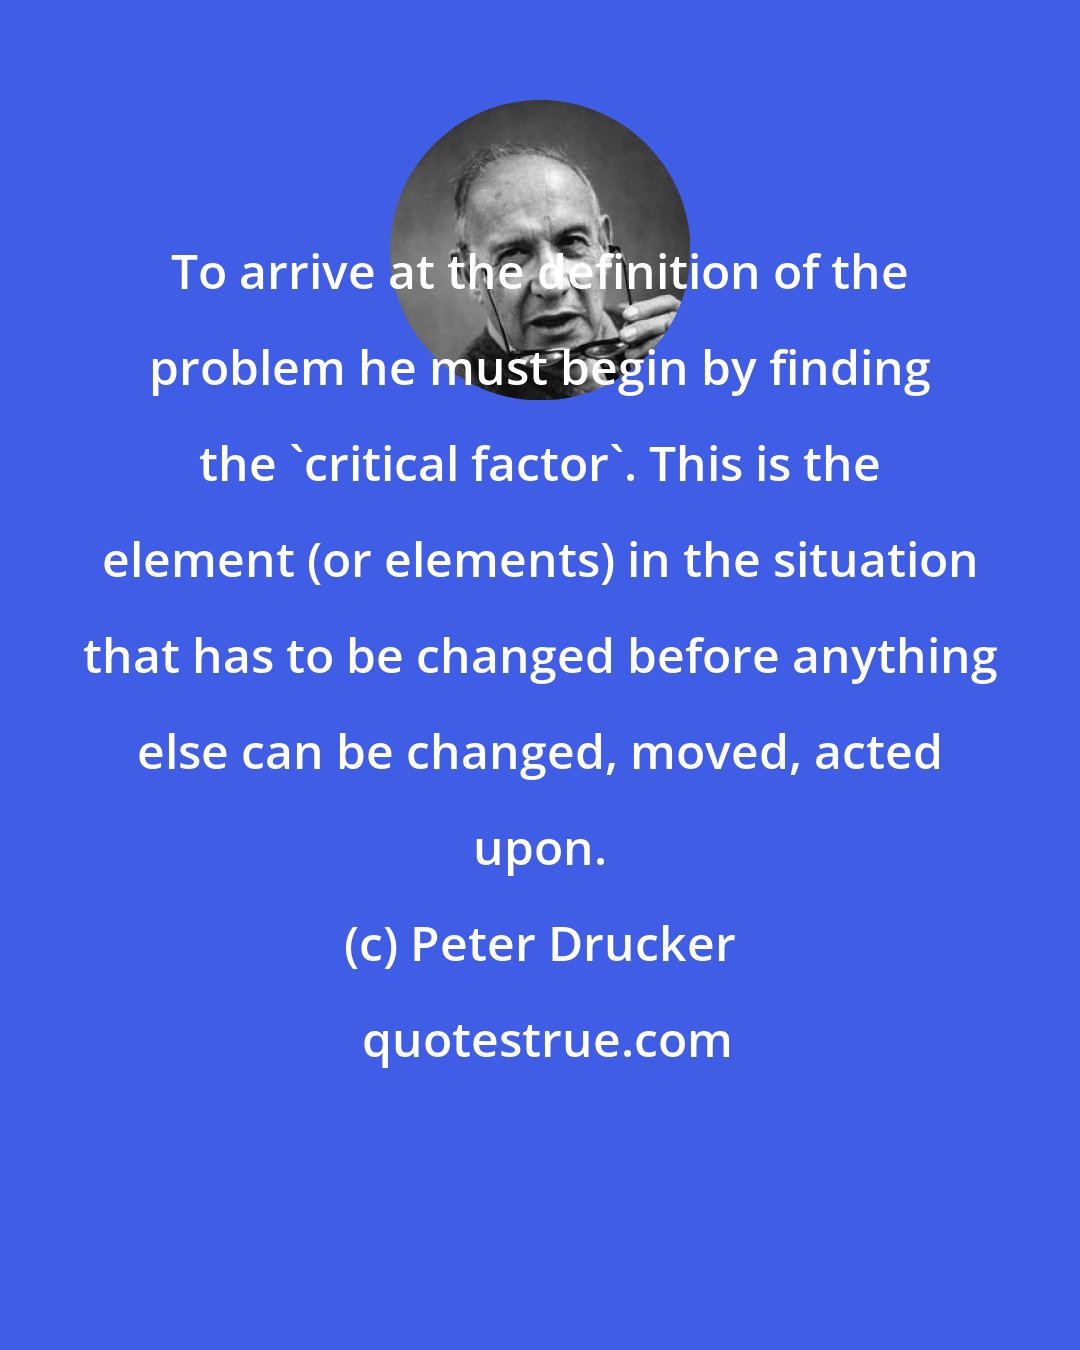 Peter Drucker: To arrive at the definition of the problem he must begin by finding the 'critical factor'. This is the element (or elements) in the situation that has to be changed before anything else can be changed, moved, acted upon.